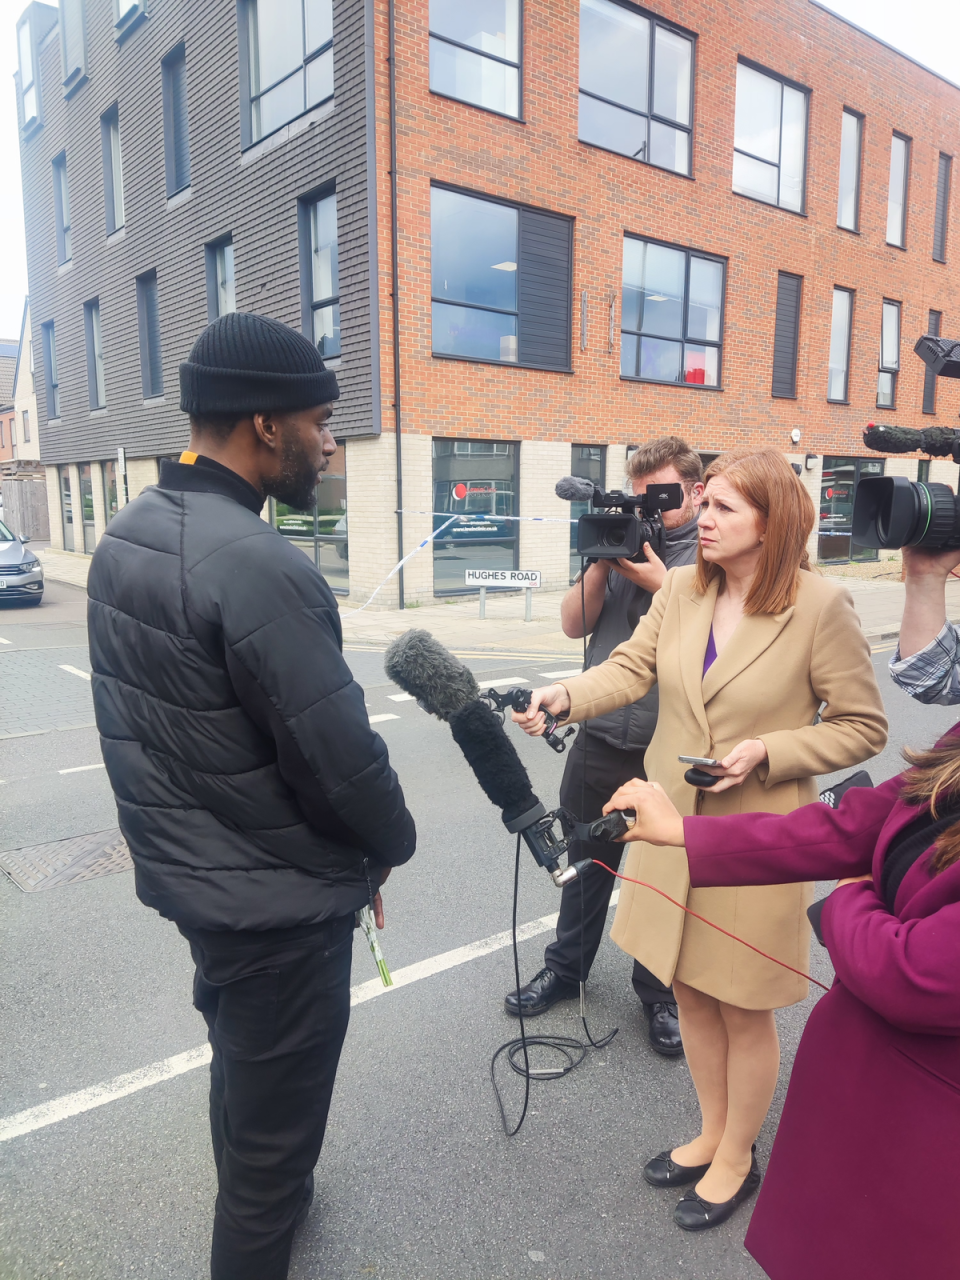 Faron Paul speaking to reporters at the scene of the Hainault attack (Barney Davis/The Independent)